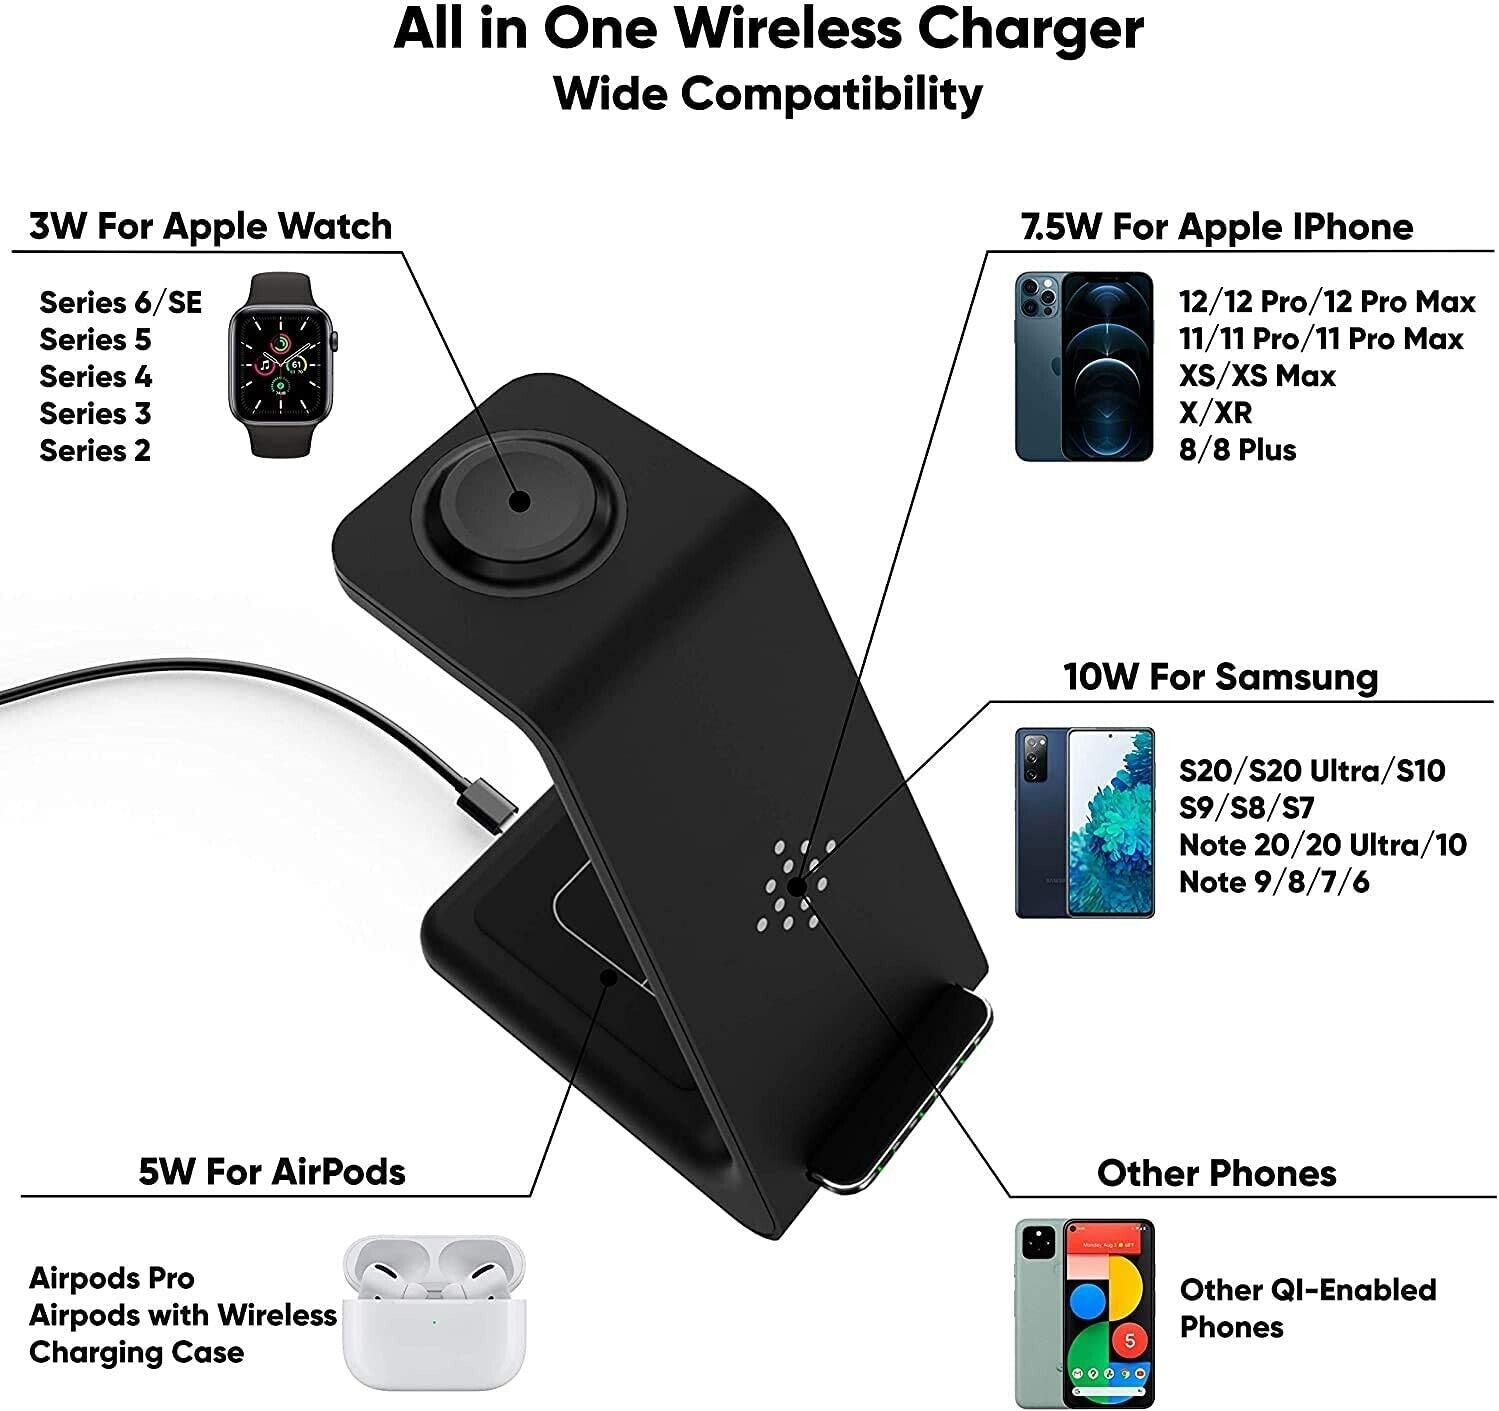 Phones-Accessories-Wireless-Charger-3-in-1-Wireless-Charging-Station-Fast-Desk-Charging-Station-for-Samsung-iPhone-AirPods-TWS-ipad-iWatch-etc-Wireless-Charger-Stand-15